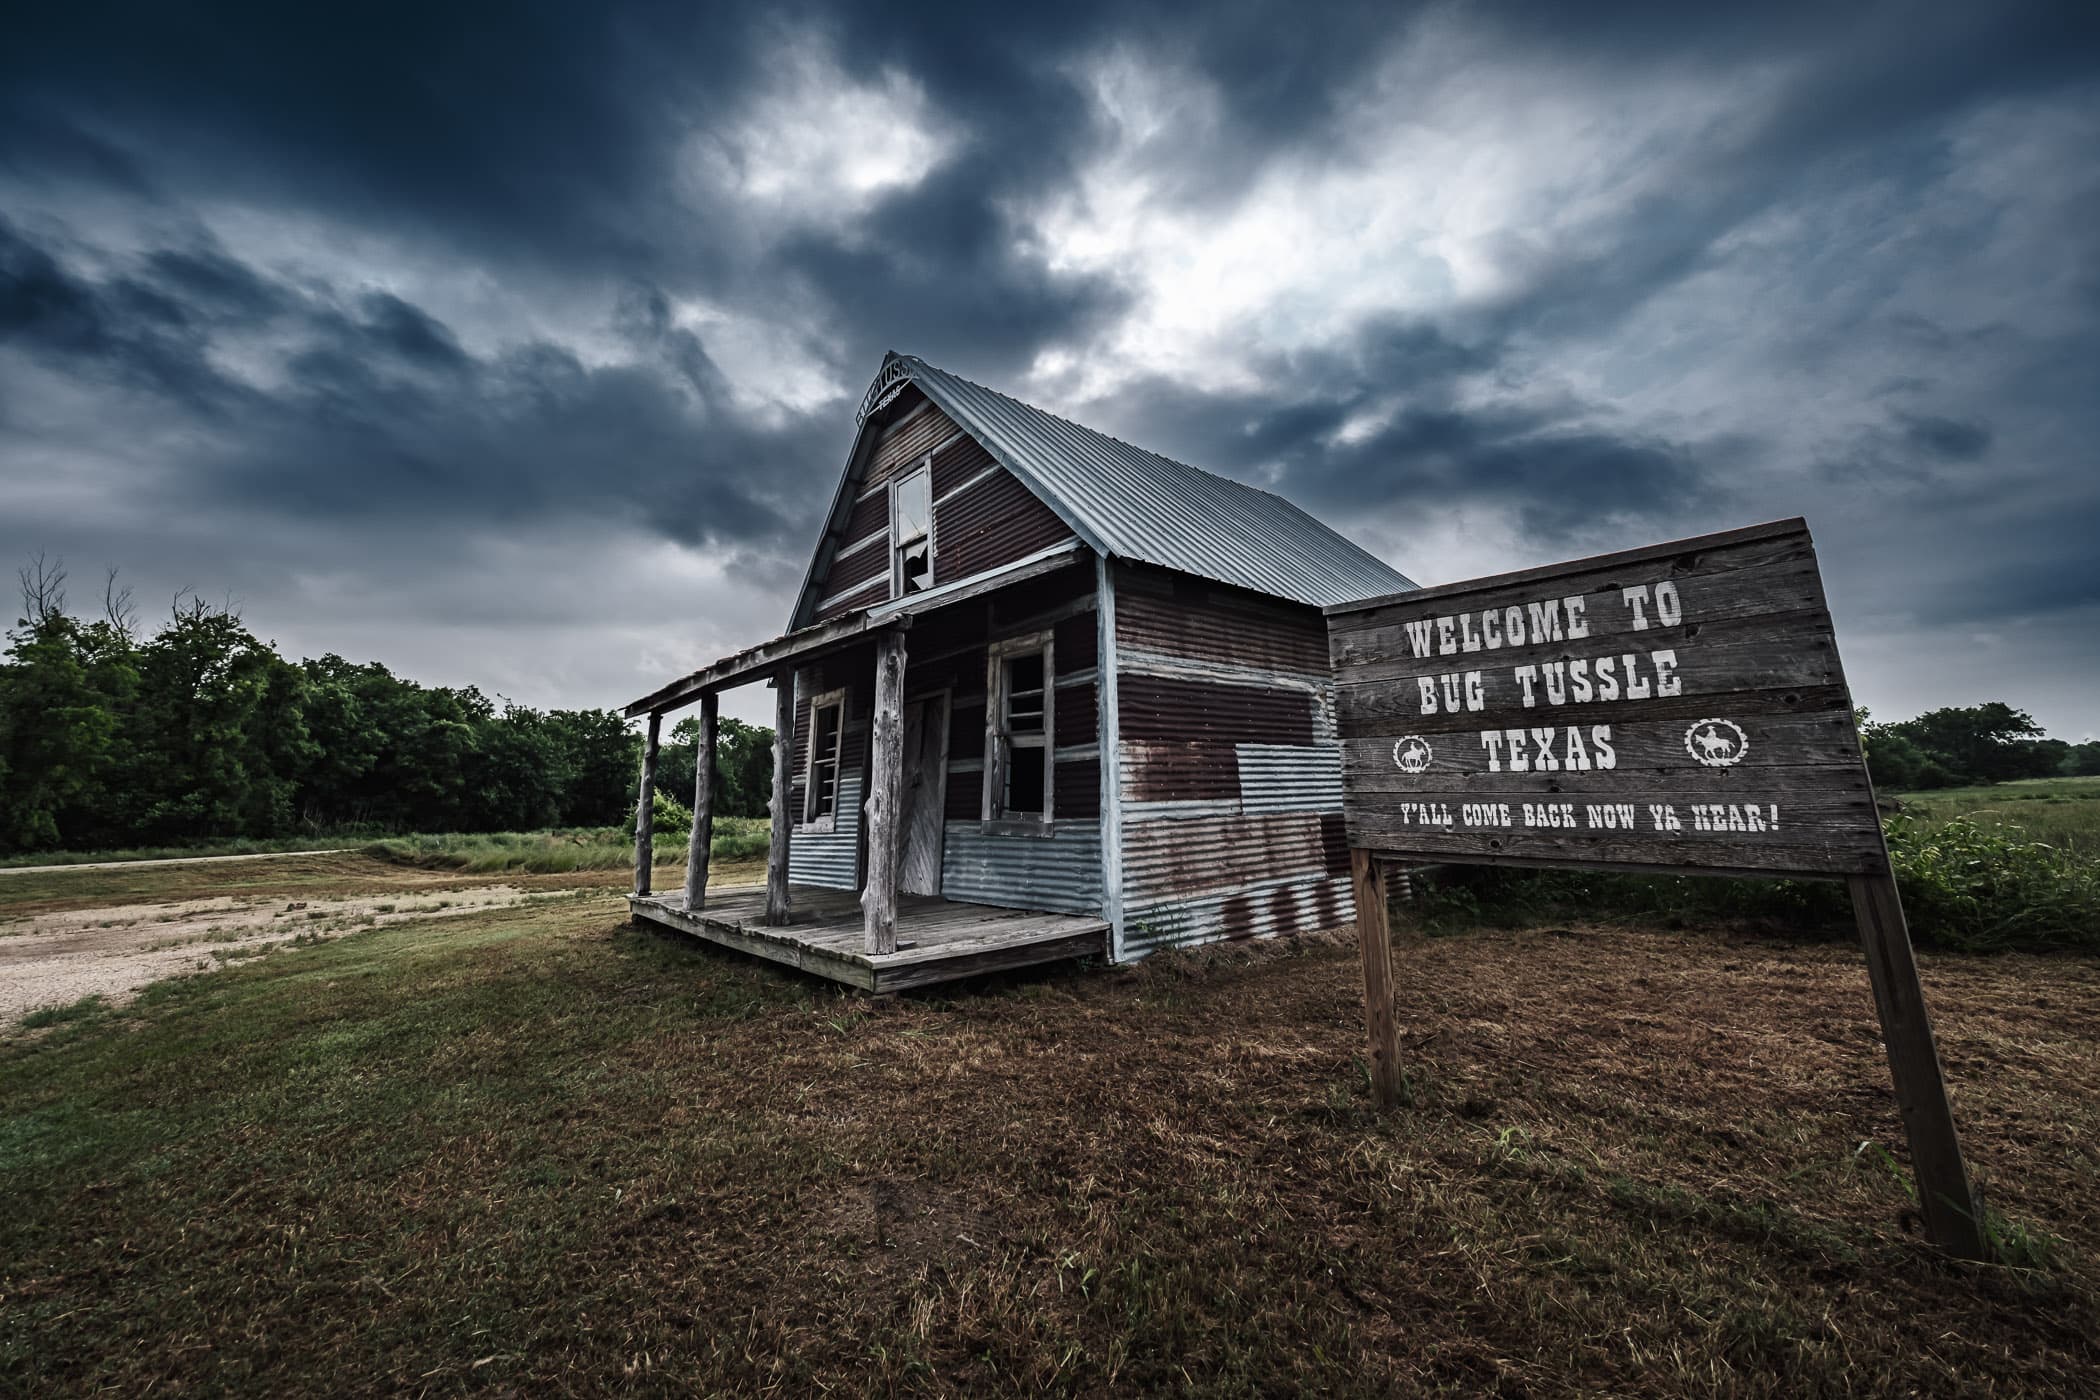 The long-abandoned Bug Tussle General Store—all that remains of this unusually-named North Texas town.